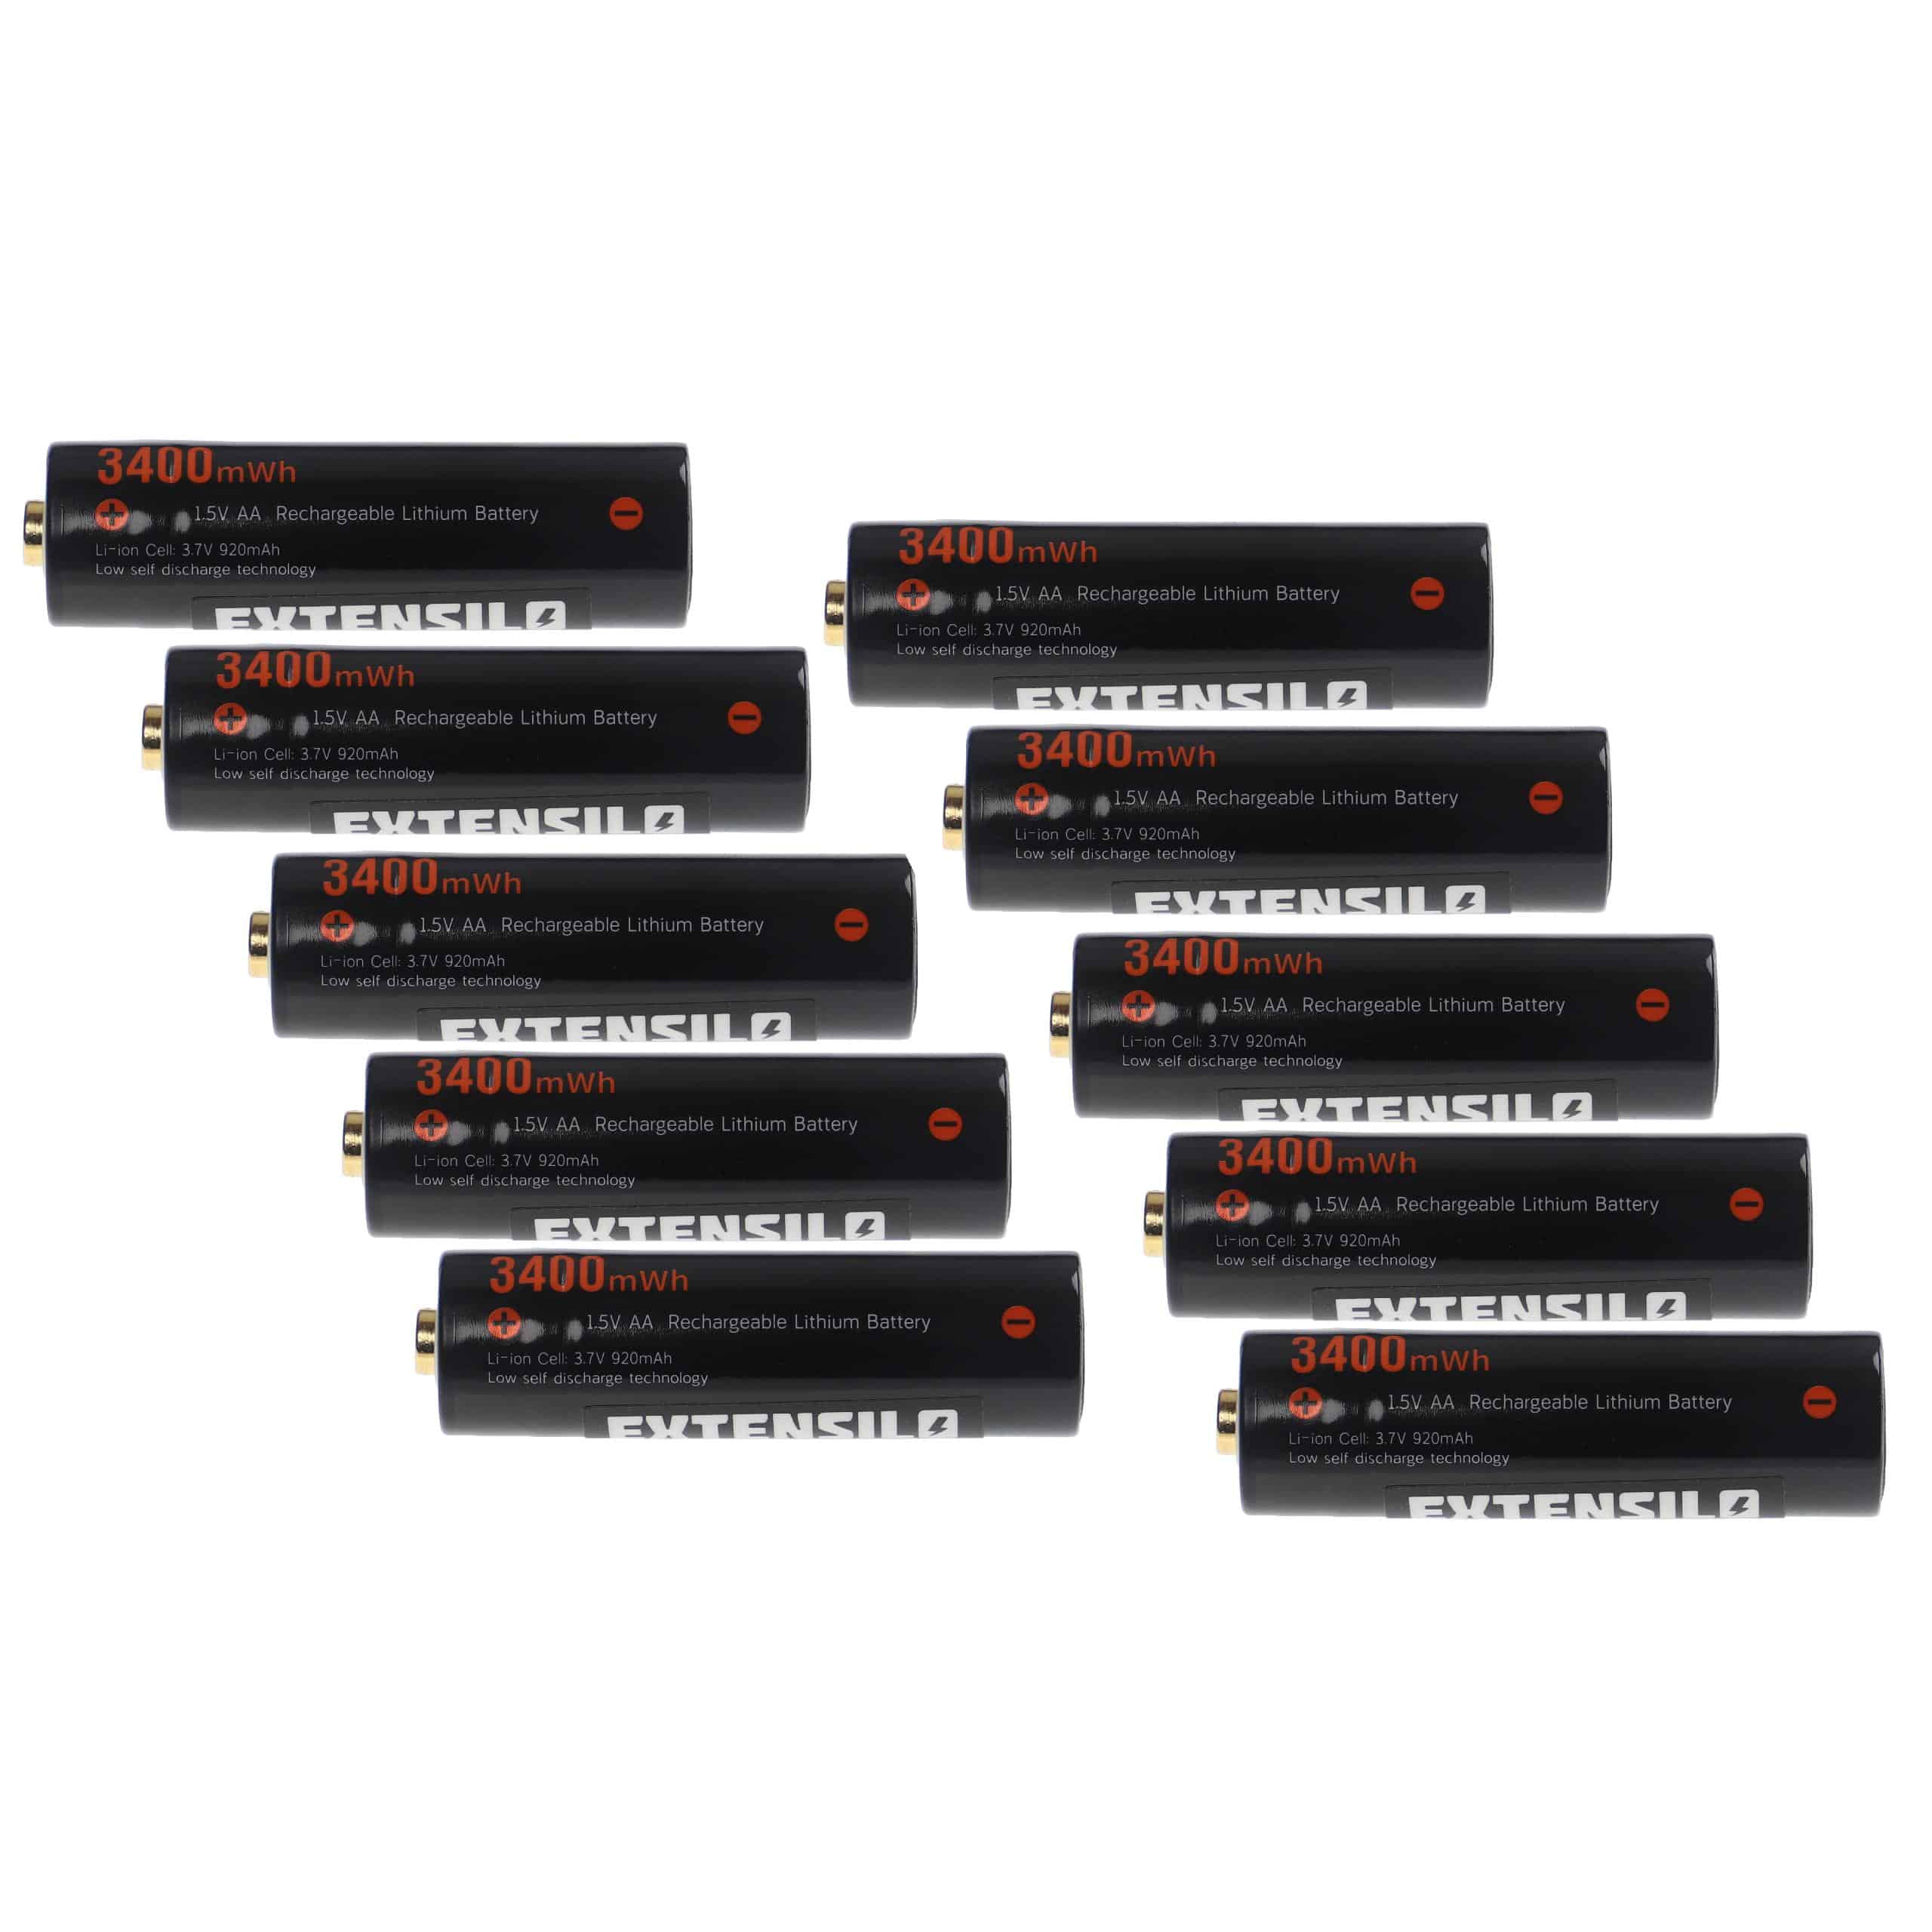 AA Mignon Replacement Battery (10 Units) for Use in Various Devices - 920 mAh 3.7 V Li-Ion